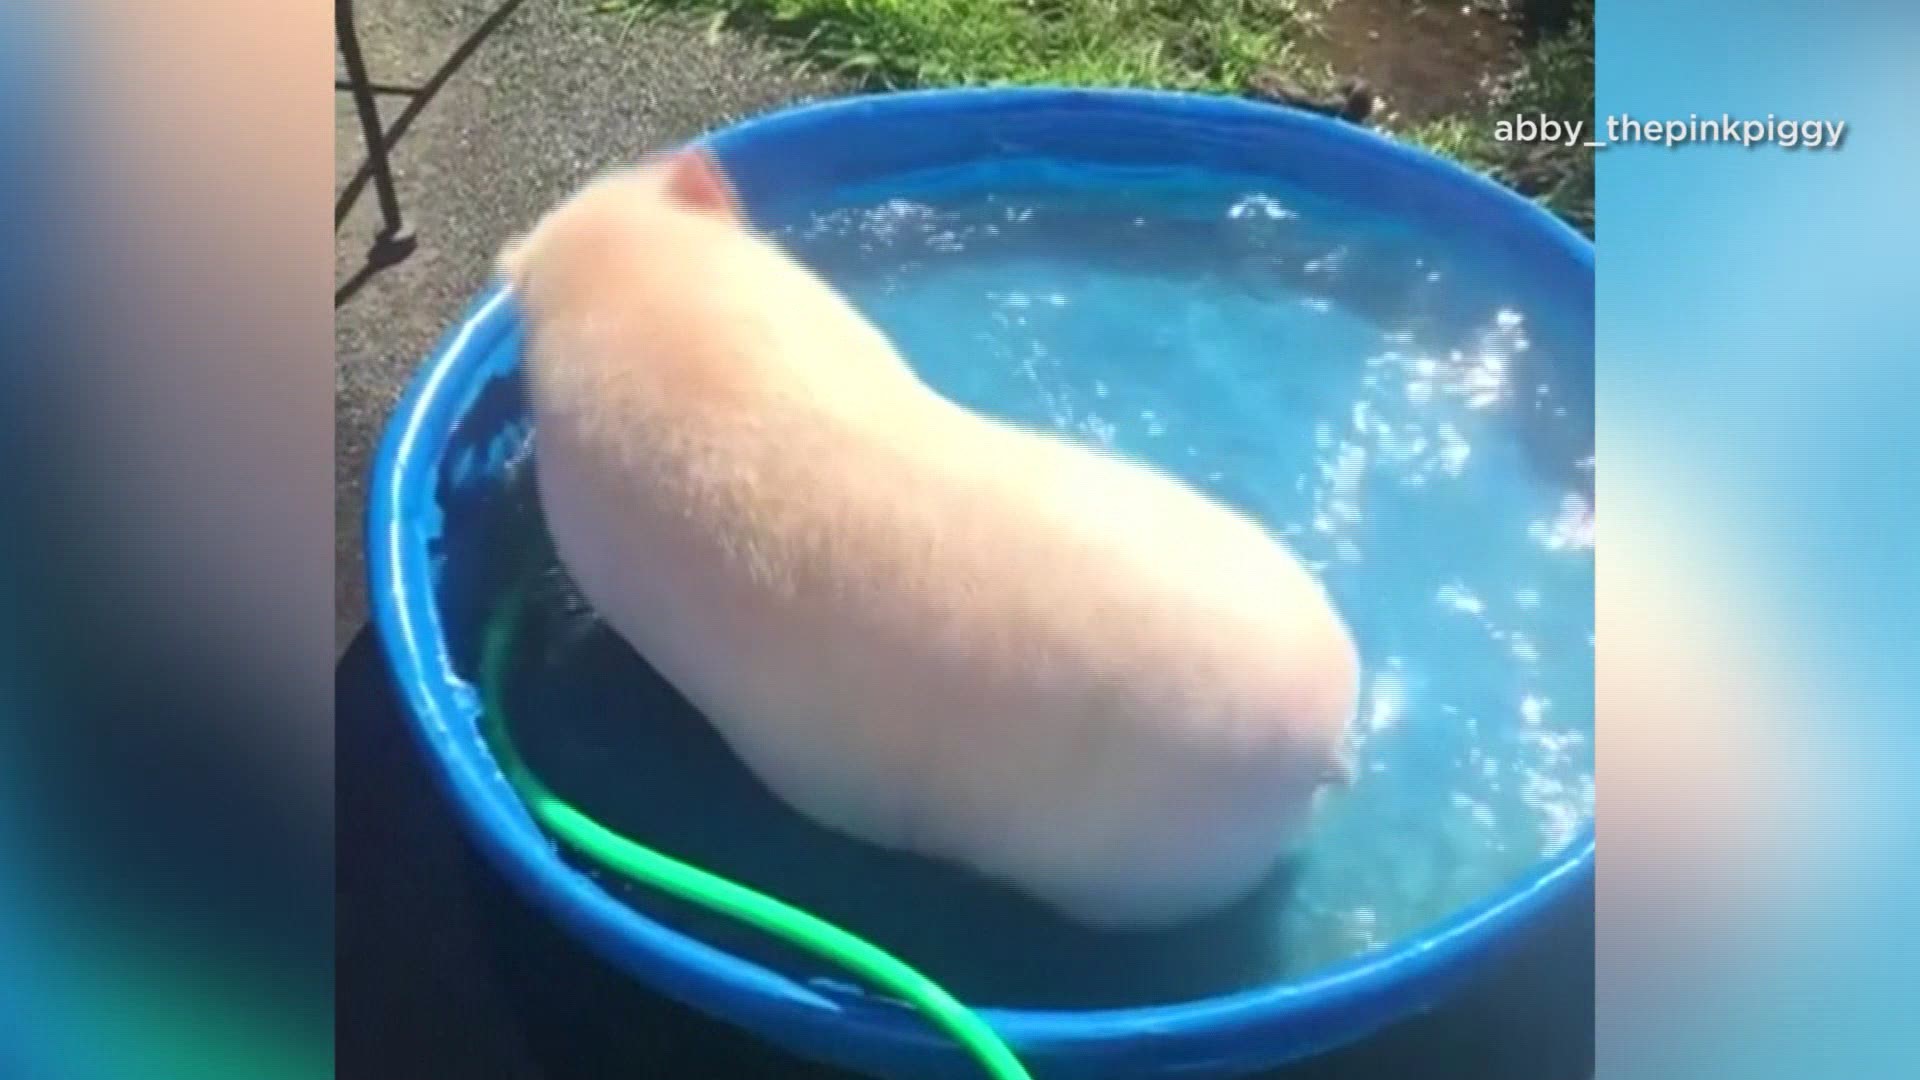 “Abby” the pig captured cooling off in a kiddie pool in Connecticut.